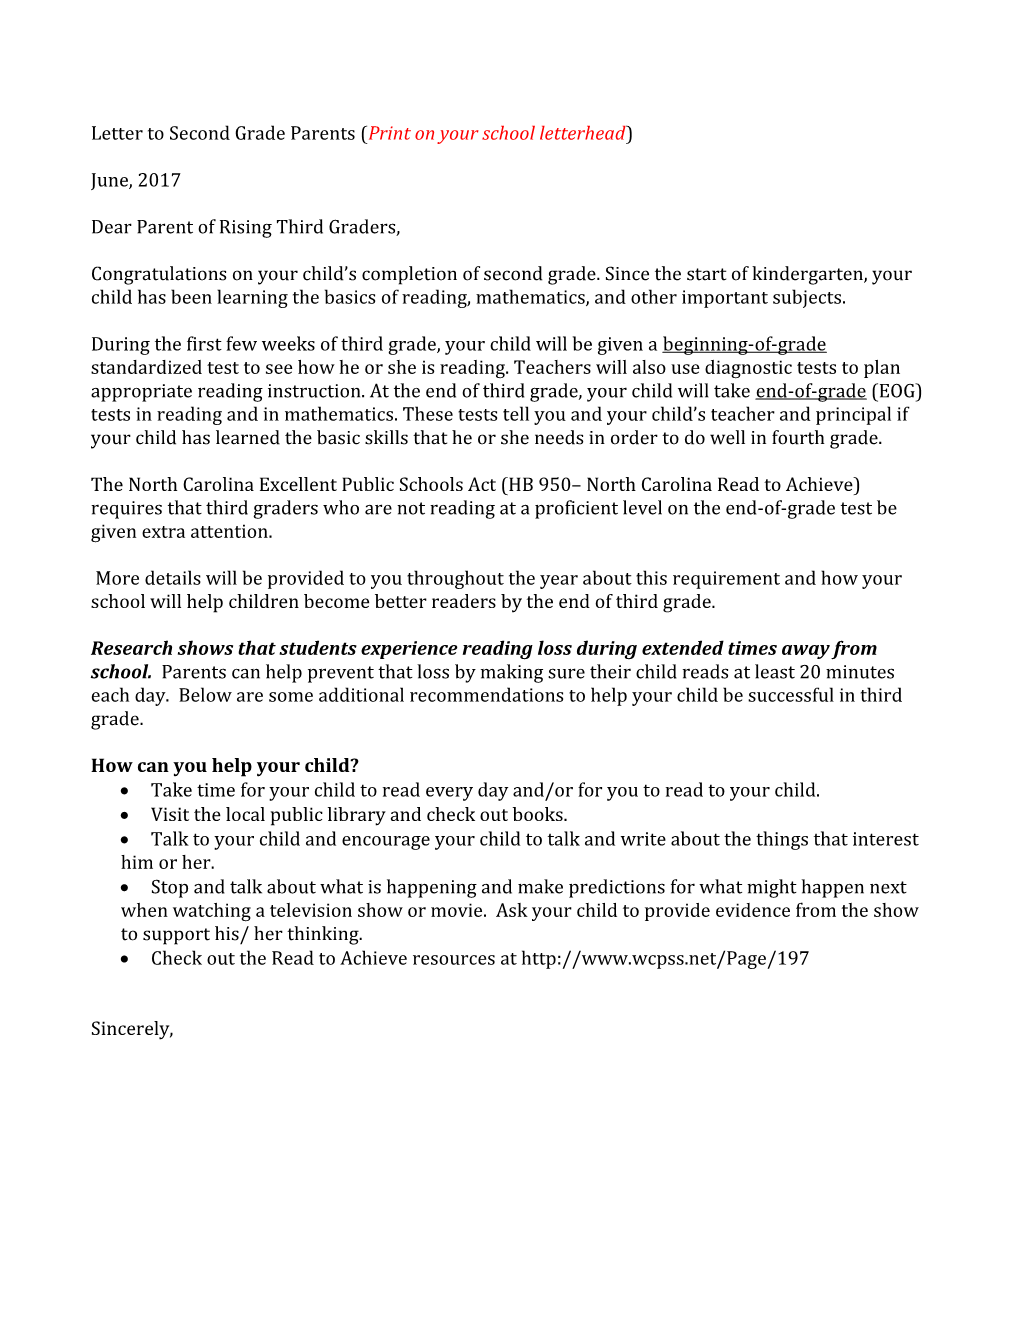 Letter to Second Grade Parents (Print on Your School Letterhead)